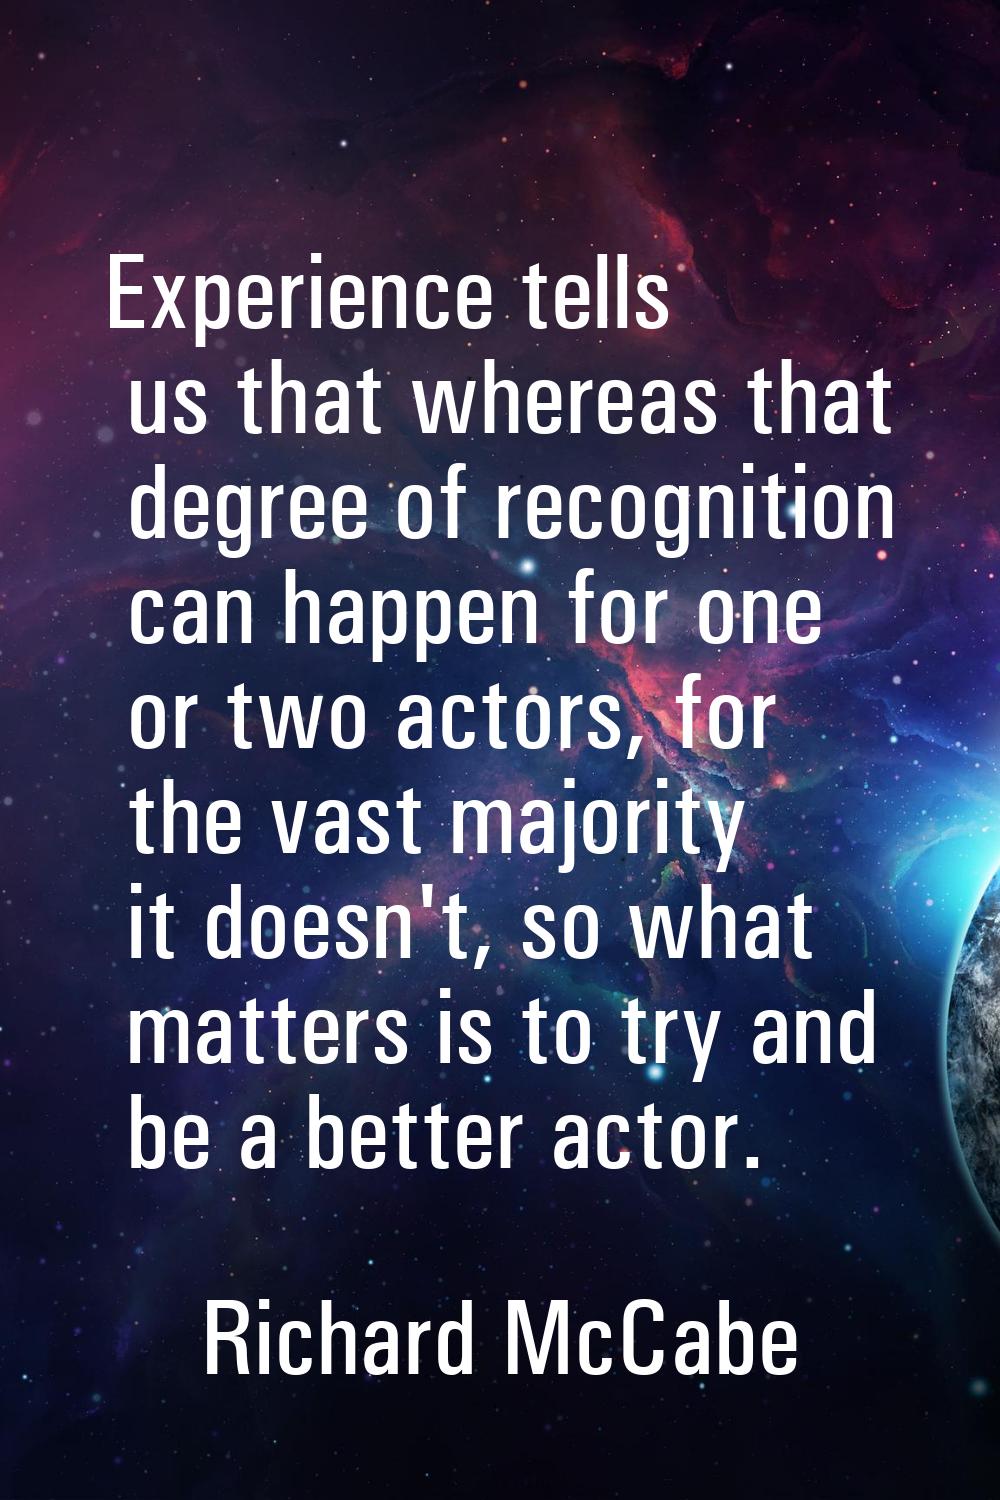 Experience tells us that whereas that degree of recognition can happen for one or two actors, for t